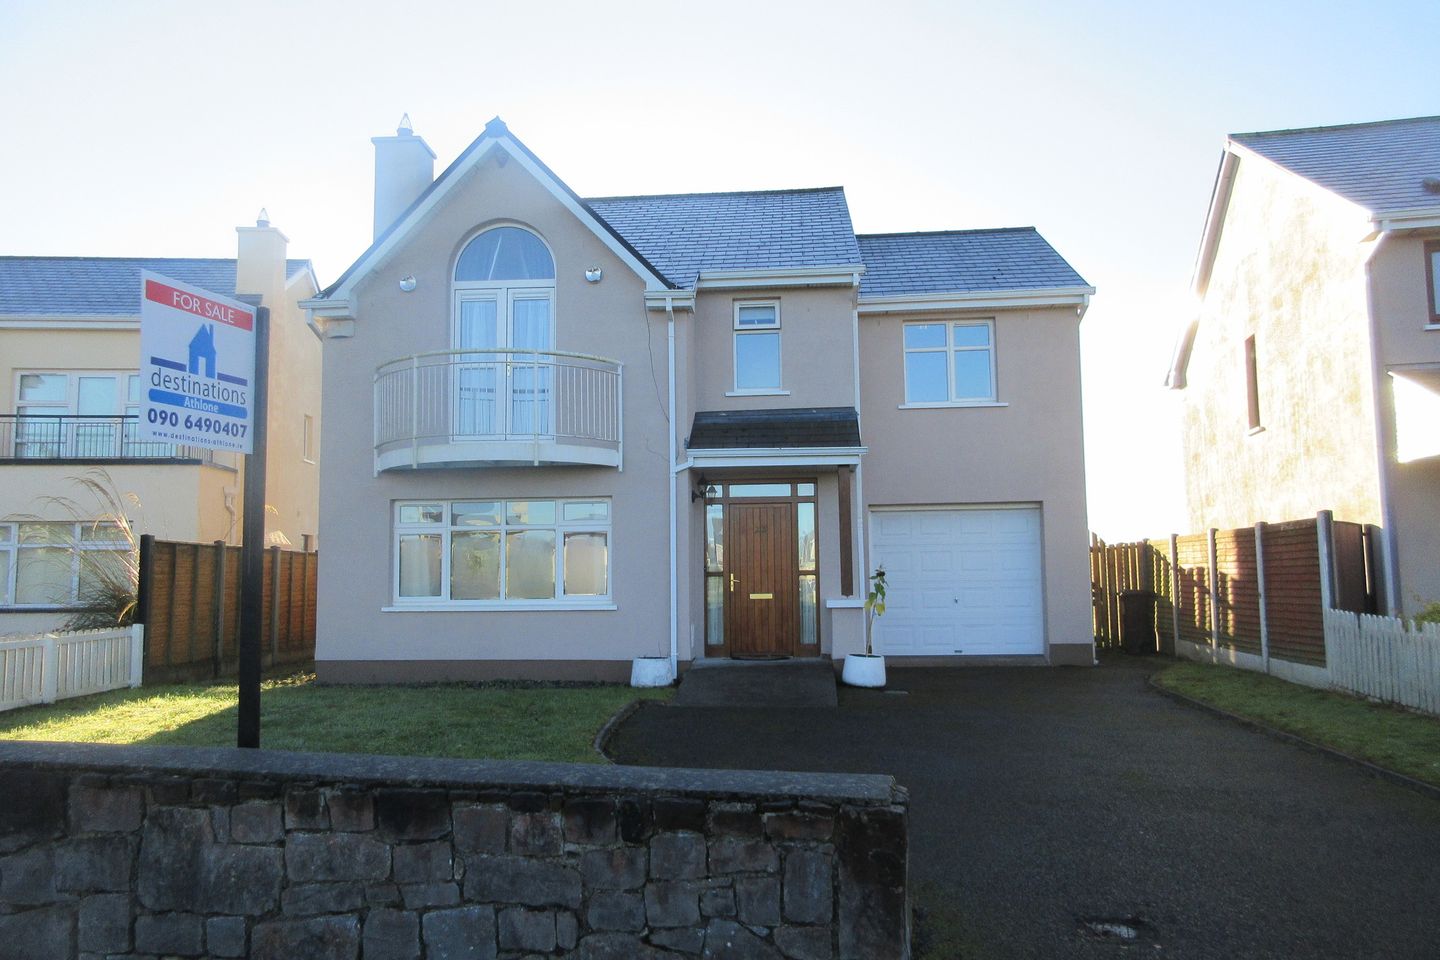 203 River Village, Monksland, Athlone, Co. Roscommon, N37A9T8